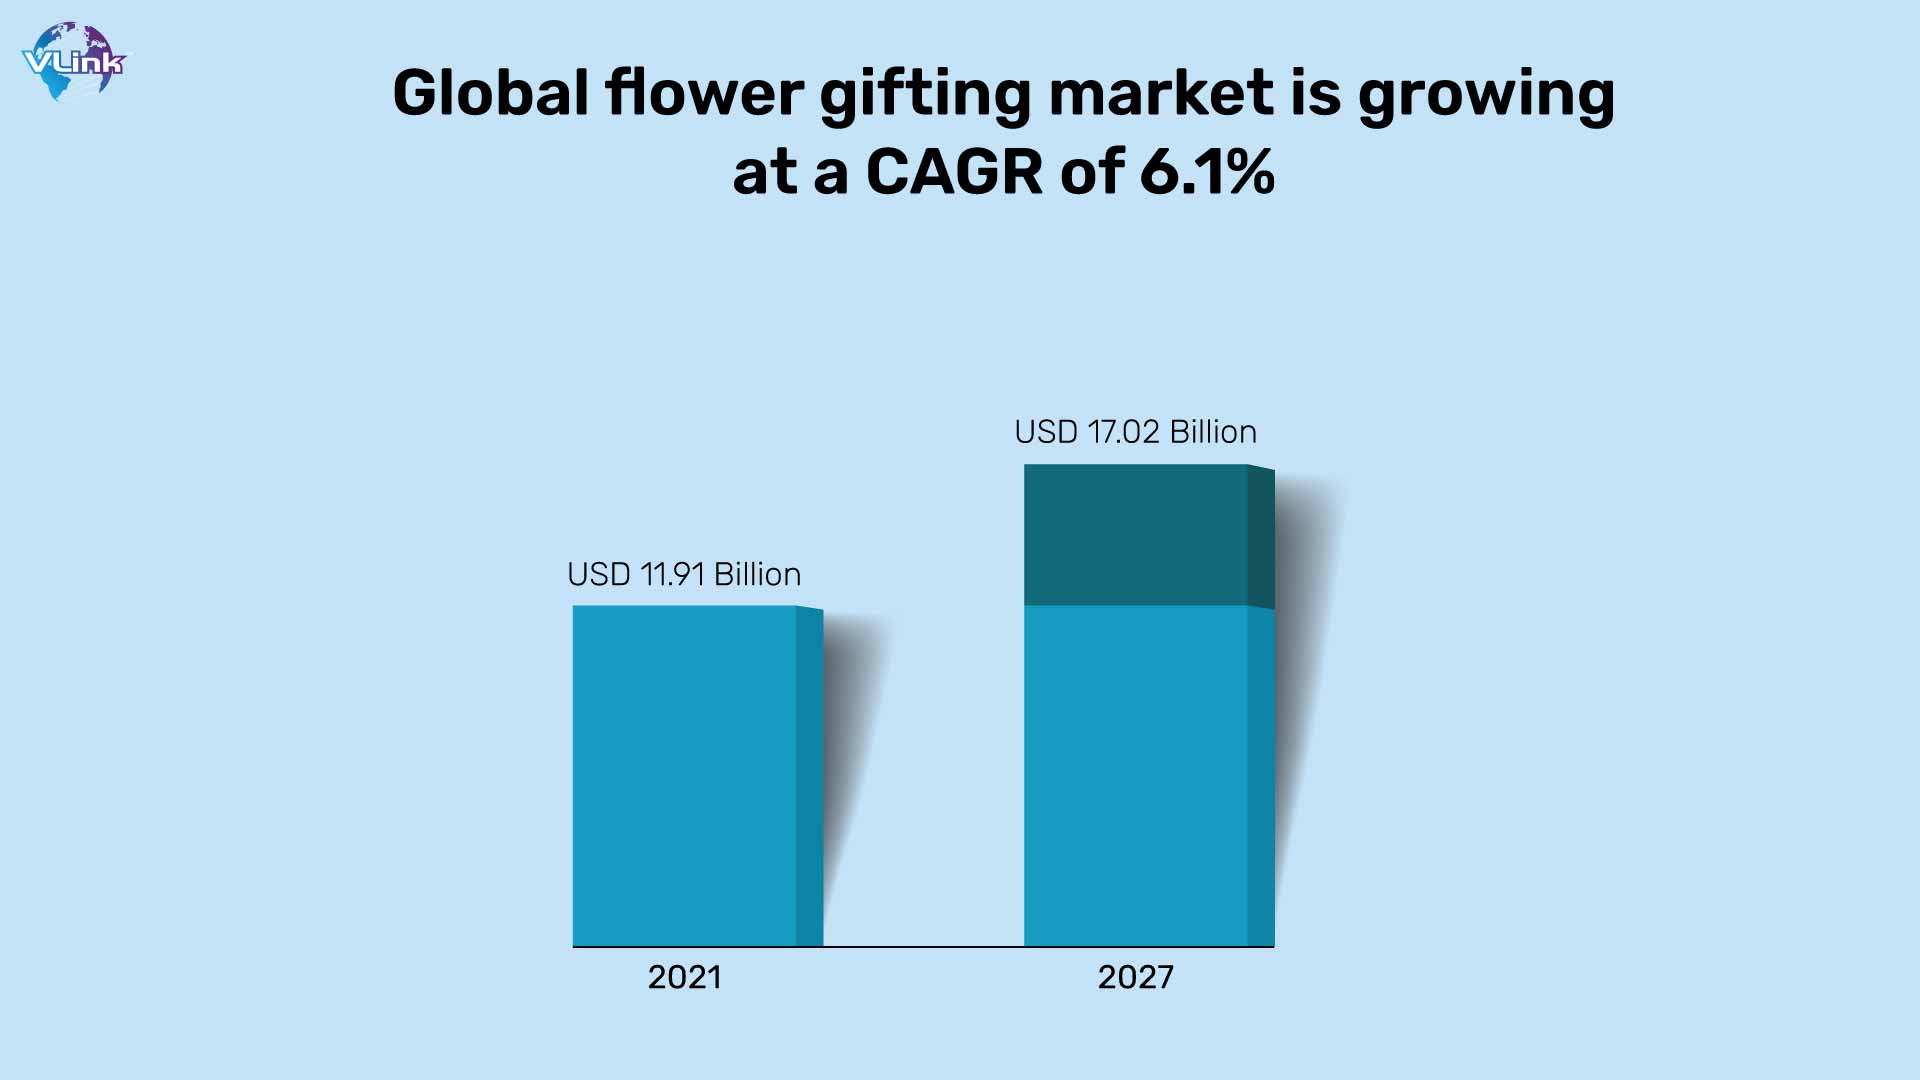 Global flower gifting market is growing at a CAGR of 6.1%